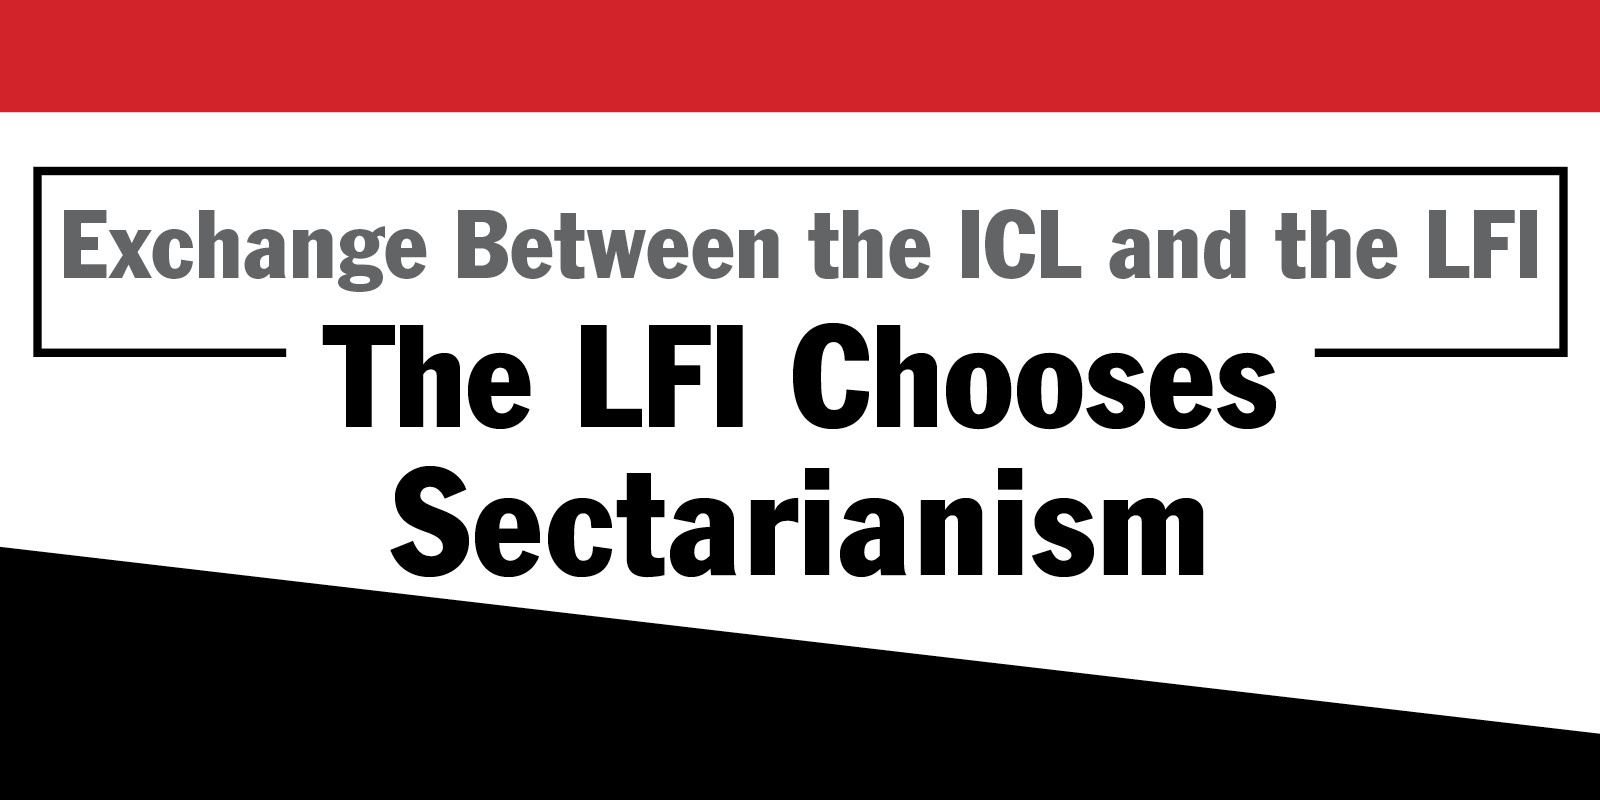 The LFI Chooses Sectarianism